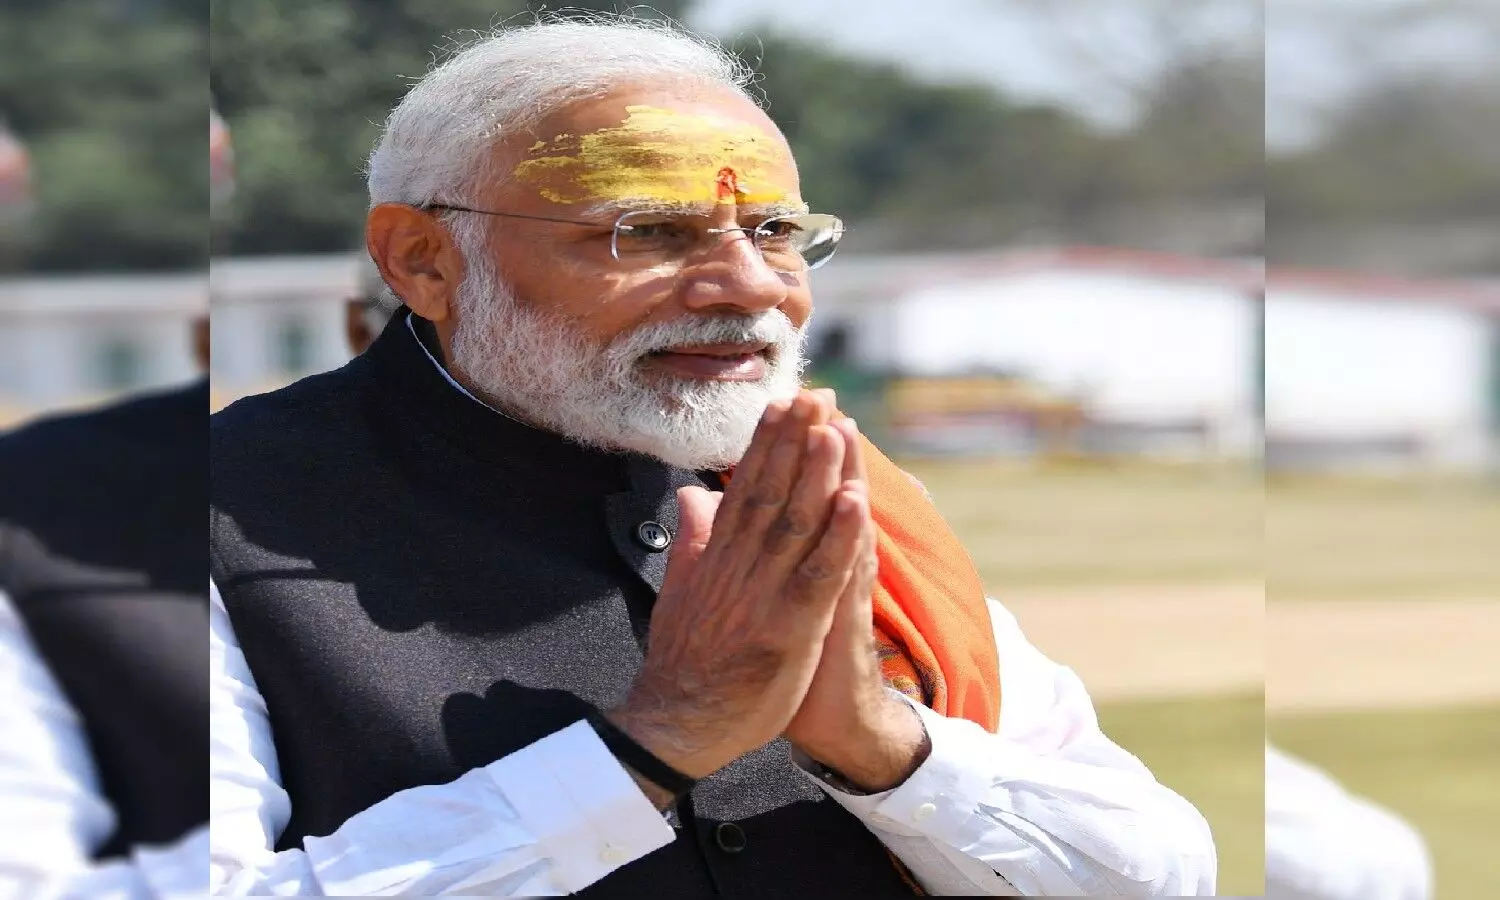 Prime Minister of the country Narendra Modi is coming to Varanasi today.